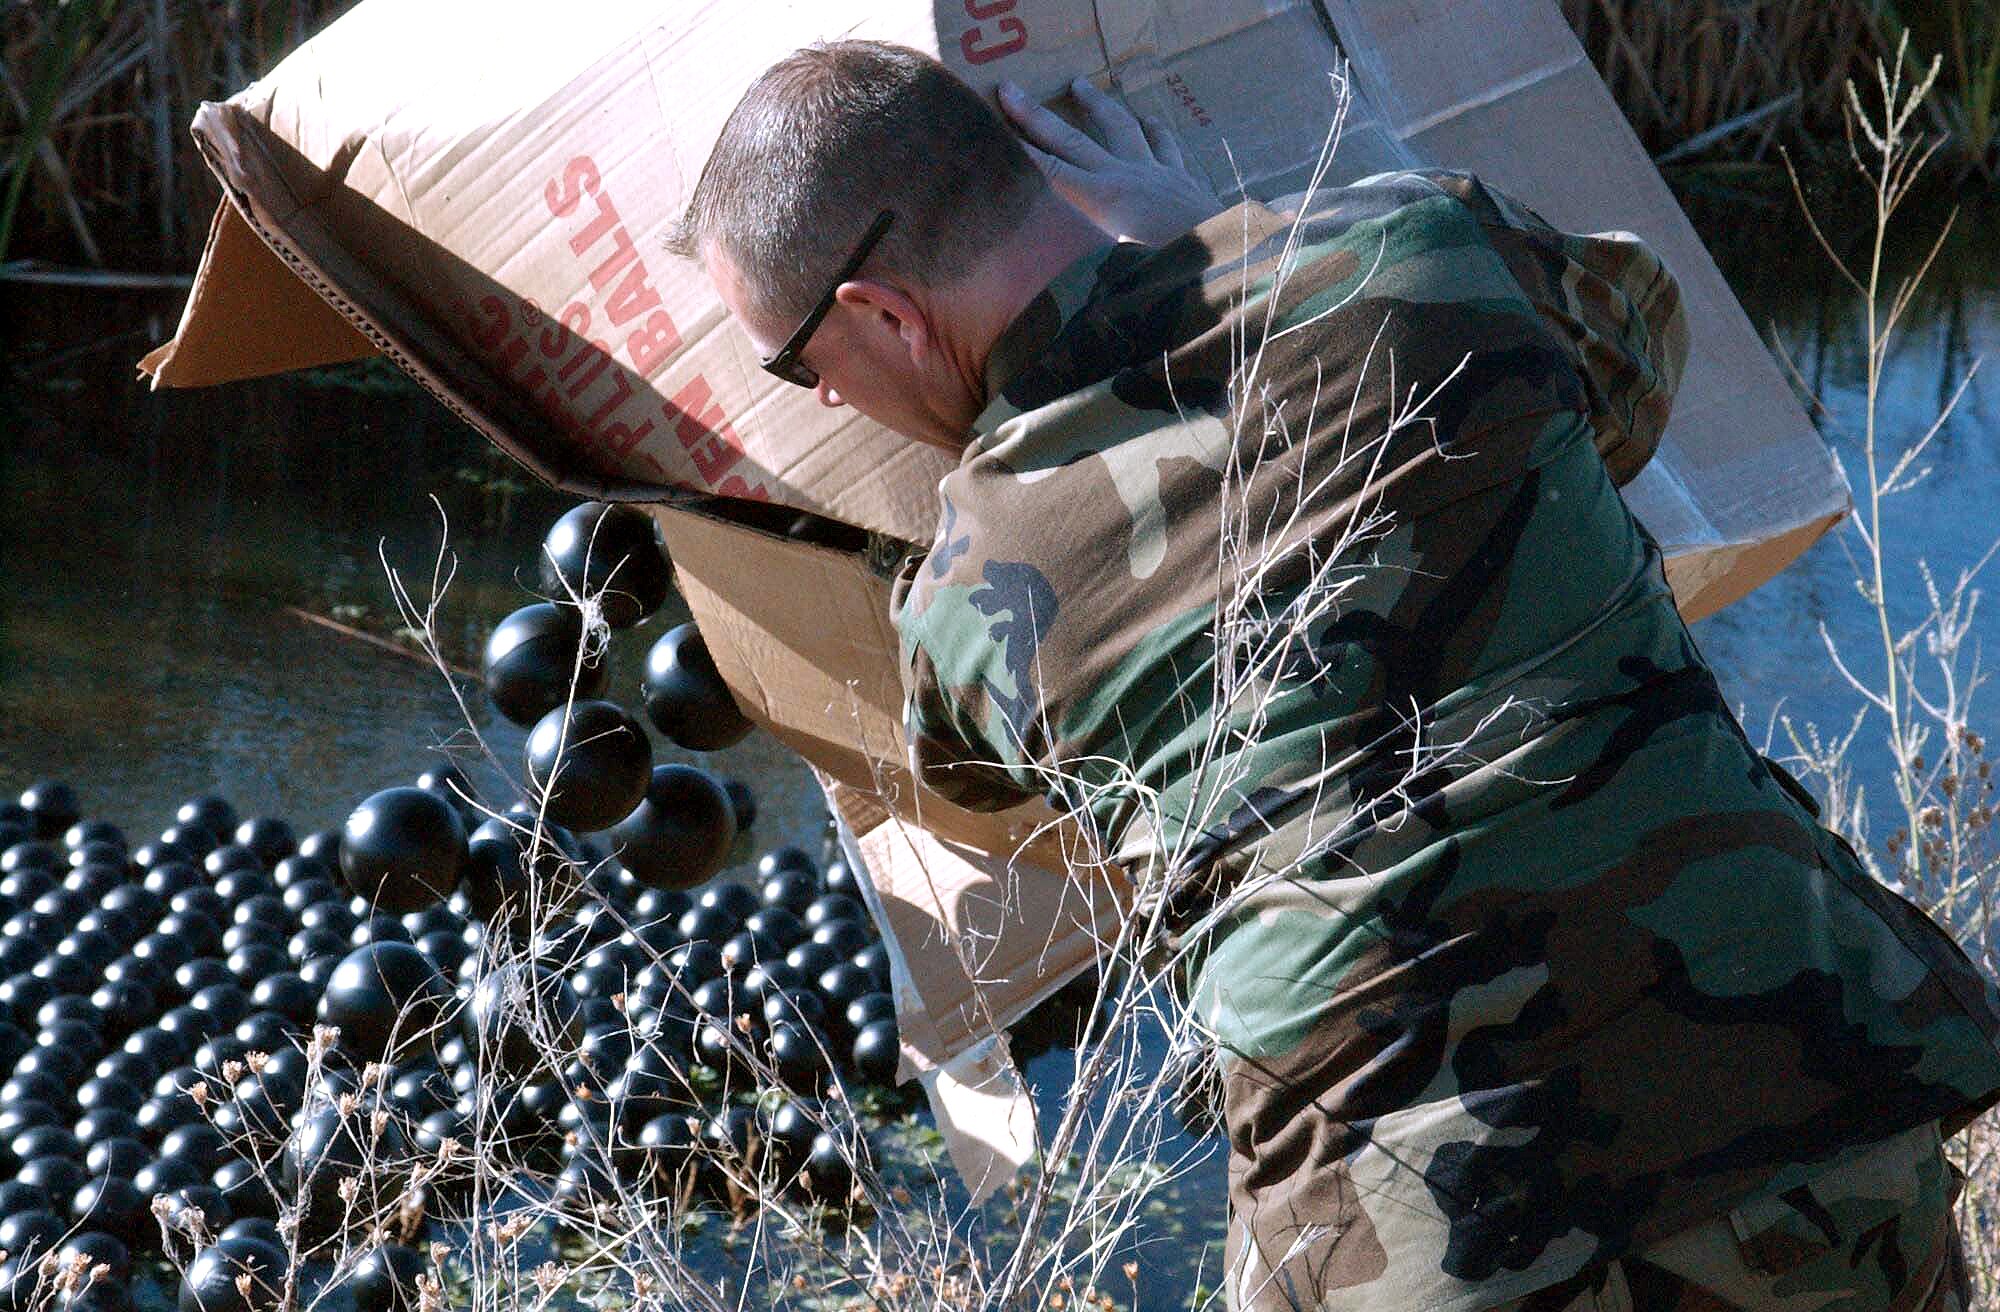 FAIRCHILD AIR FORCE BASE, Wash. -- Master Sgt. Stacy Maier dumps a box of "bird balls" into a drainage ditch along the flightline here.  Fairchild is the first Air Force base to use this newest form of protection against bird strikes.  Maier is with the 92nd Air Refueling Wing's flight safety office.  (U.S. Air Force by Airman Christie Putz)